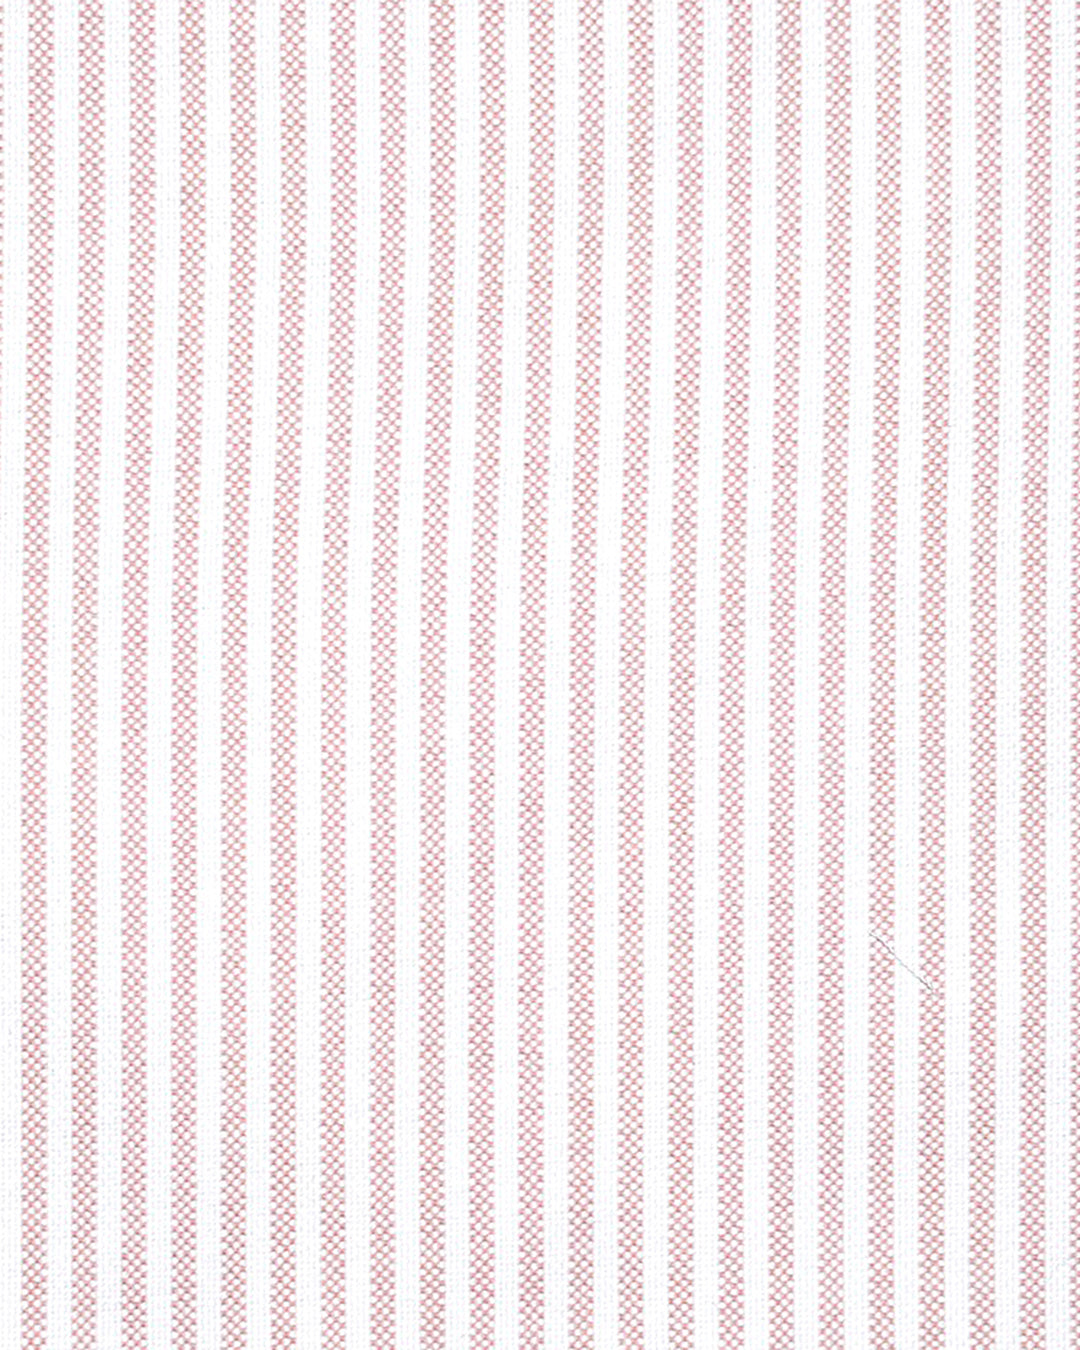 Close up of the custom oxford shirt for men by Luxire in white with pink university stripes